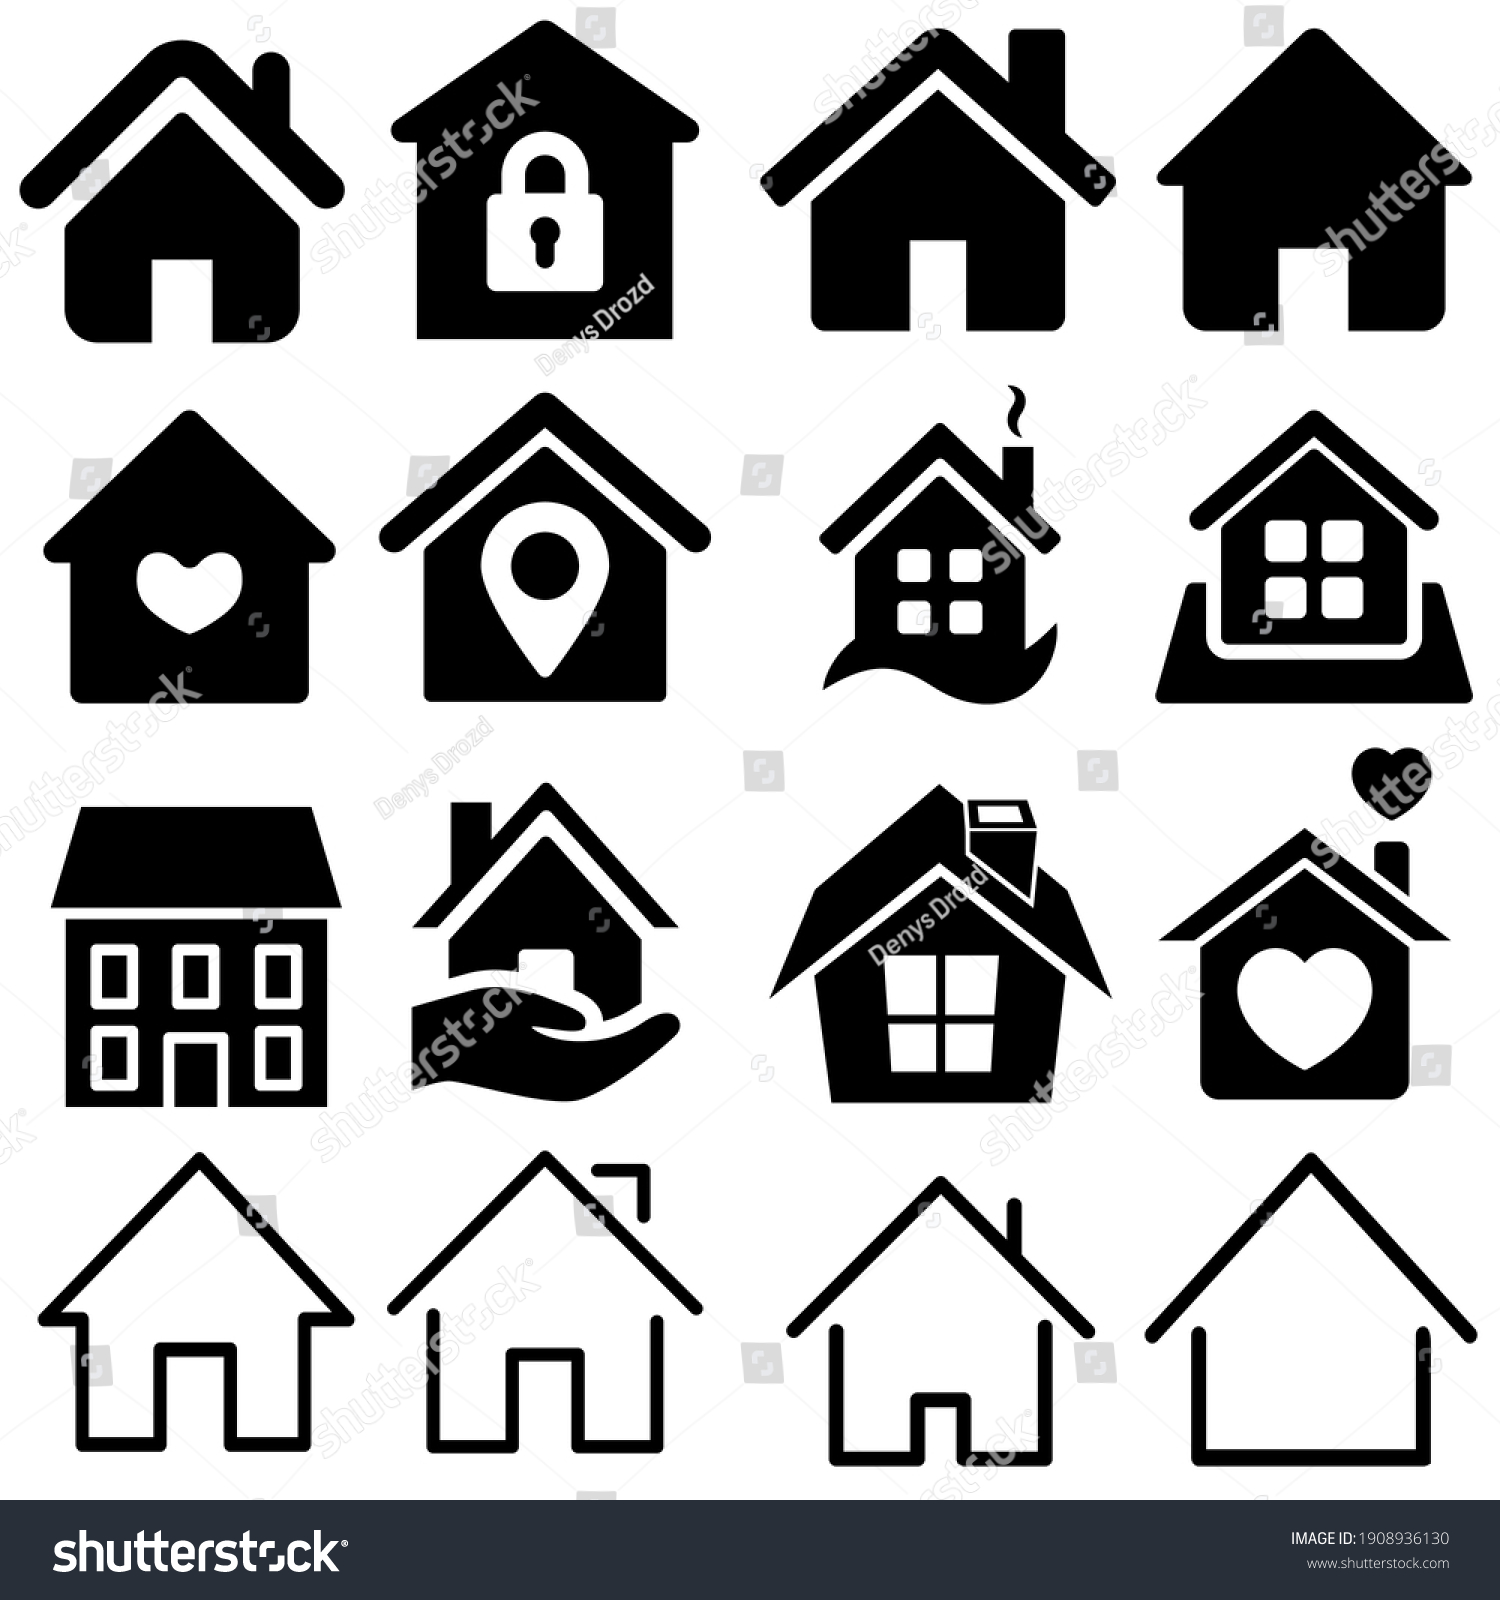 SVG of House vector icon set. home illustration sign collection. building symbol. svg